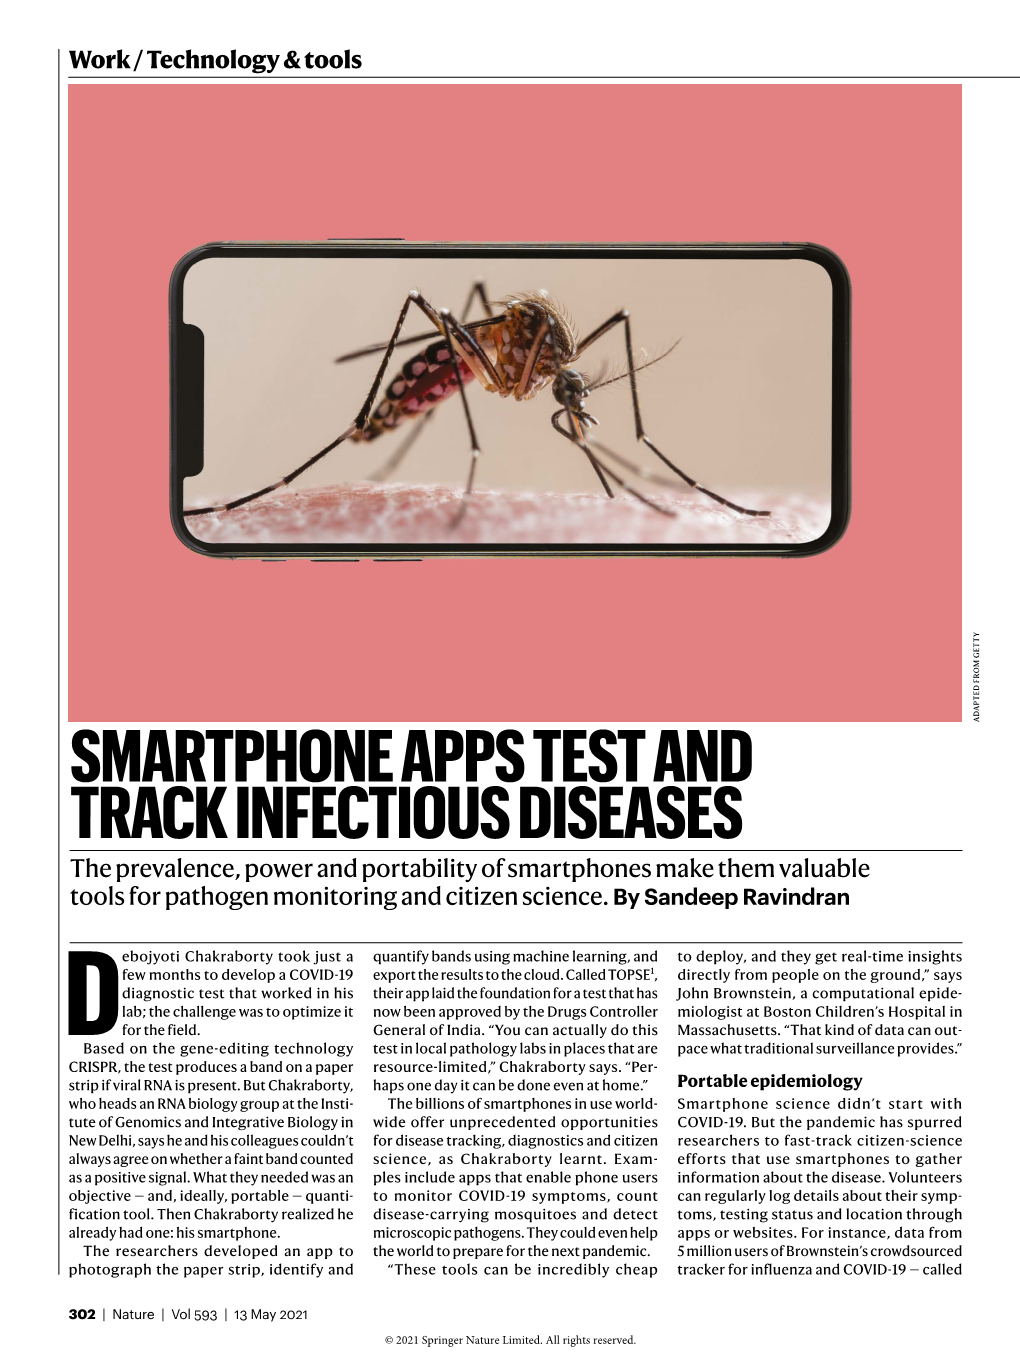 Smartphone Apps Test and Track Infectious Diseases